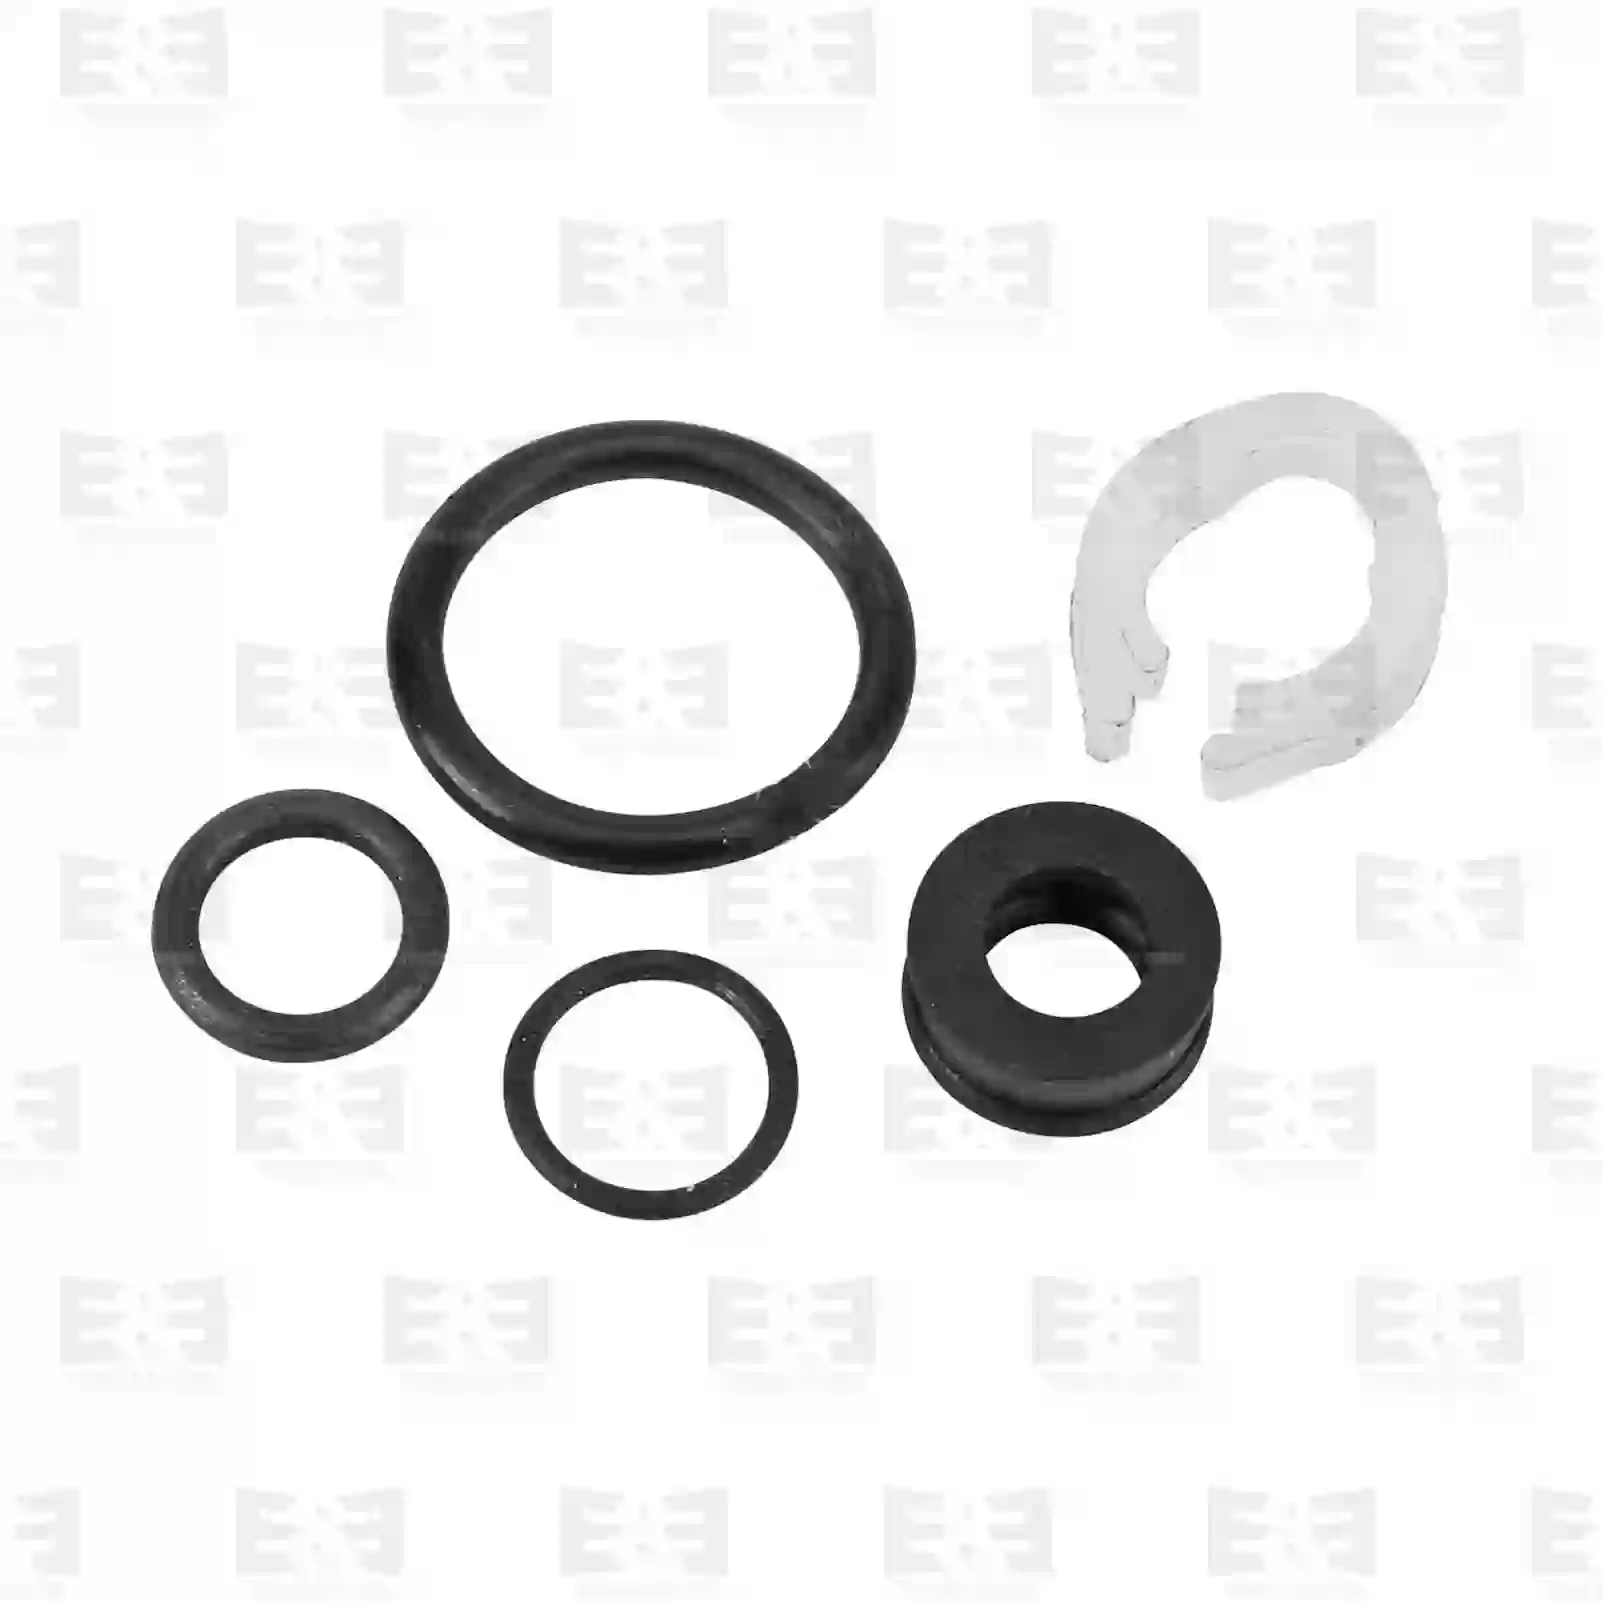 Compressed Air Gasket kit, EE No 2E2285746 ,  oem no:06569390053S, 06569390055S, 81981810176, 81981810176S, 81981810178, 81981810178S, 0009940047S, 0009940747S, 0009941248S, 0009945448S, 0309971748, 6739970045, ZG50478-0008 E&E Truck Spare Parts | Truck Spare Parts, Auotomotive Spare Parts